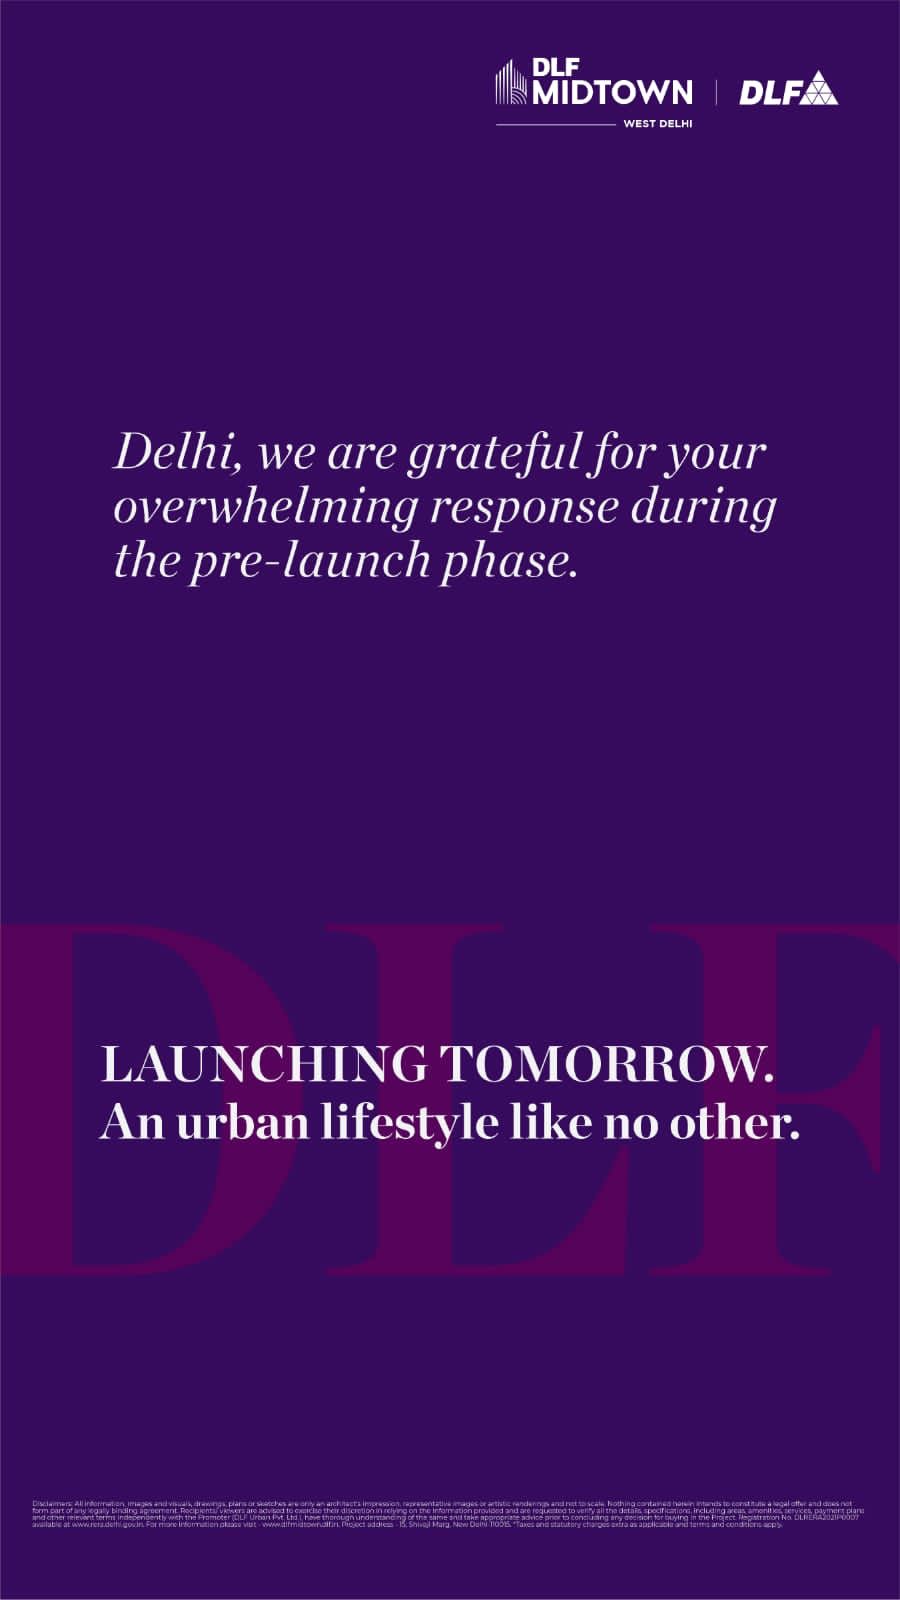 Delhi, we are grateful for your overwhelming response during the pre-launch phase at DLF One Midtown, New Delhi Update